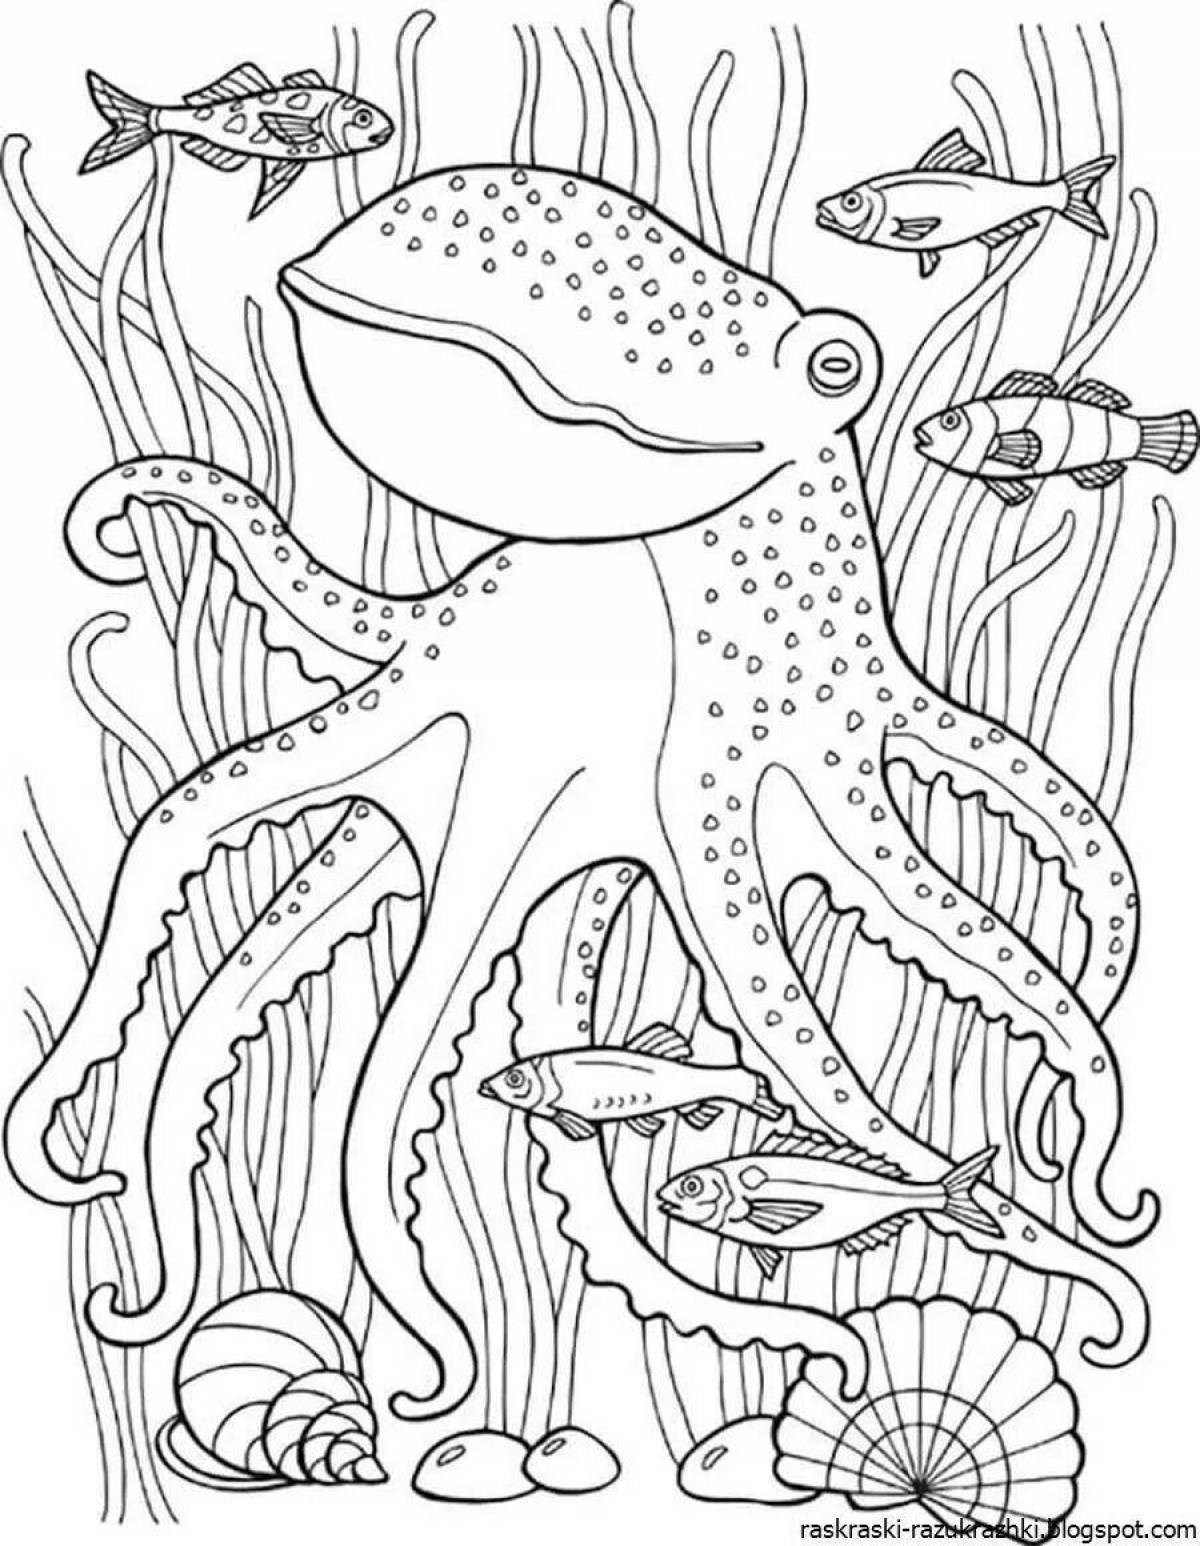 Gorgeous marine life coloring book